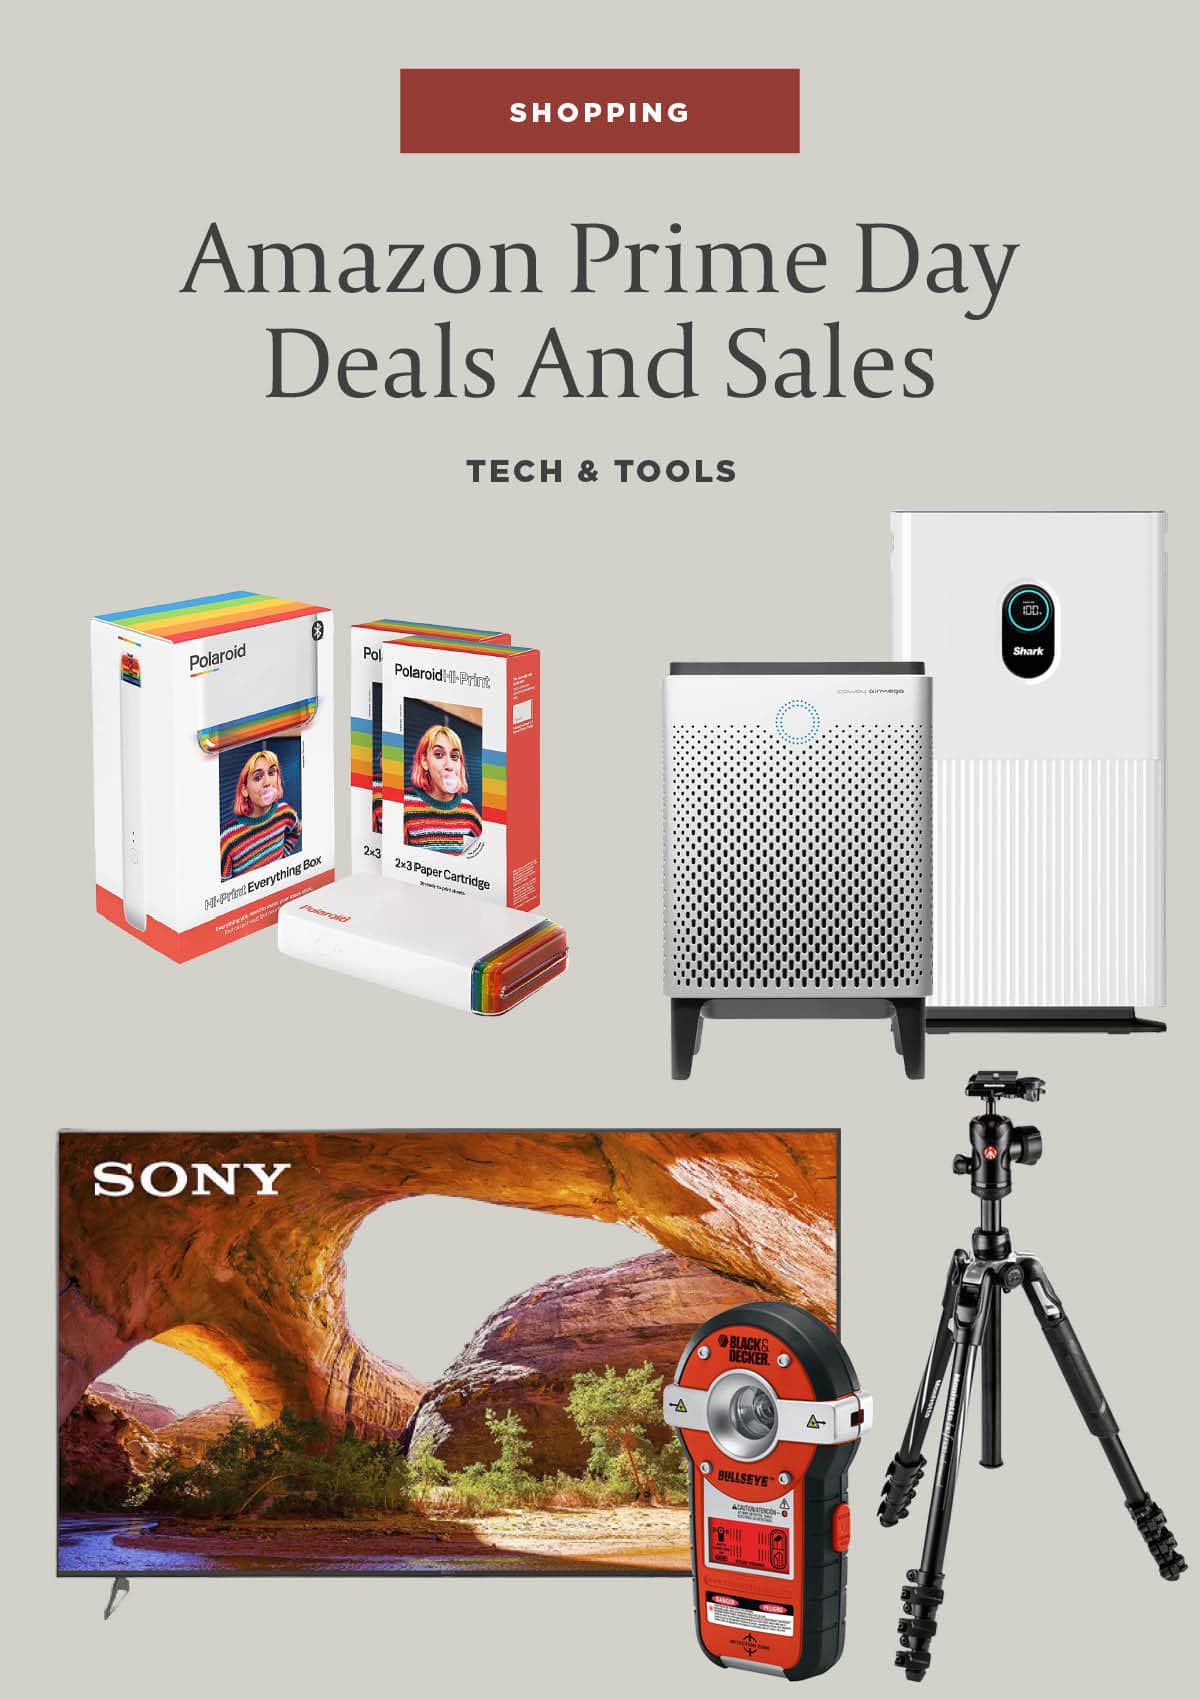 Sharing the Best Amazon Prime Day Deals on the art tv every interior designer loves and other tech for your home